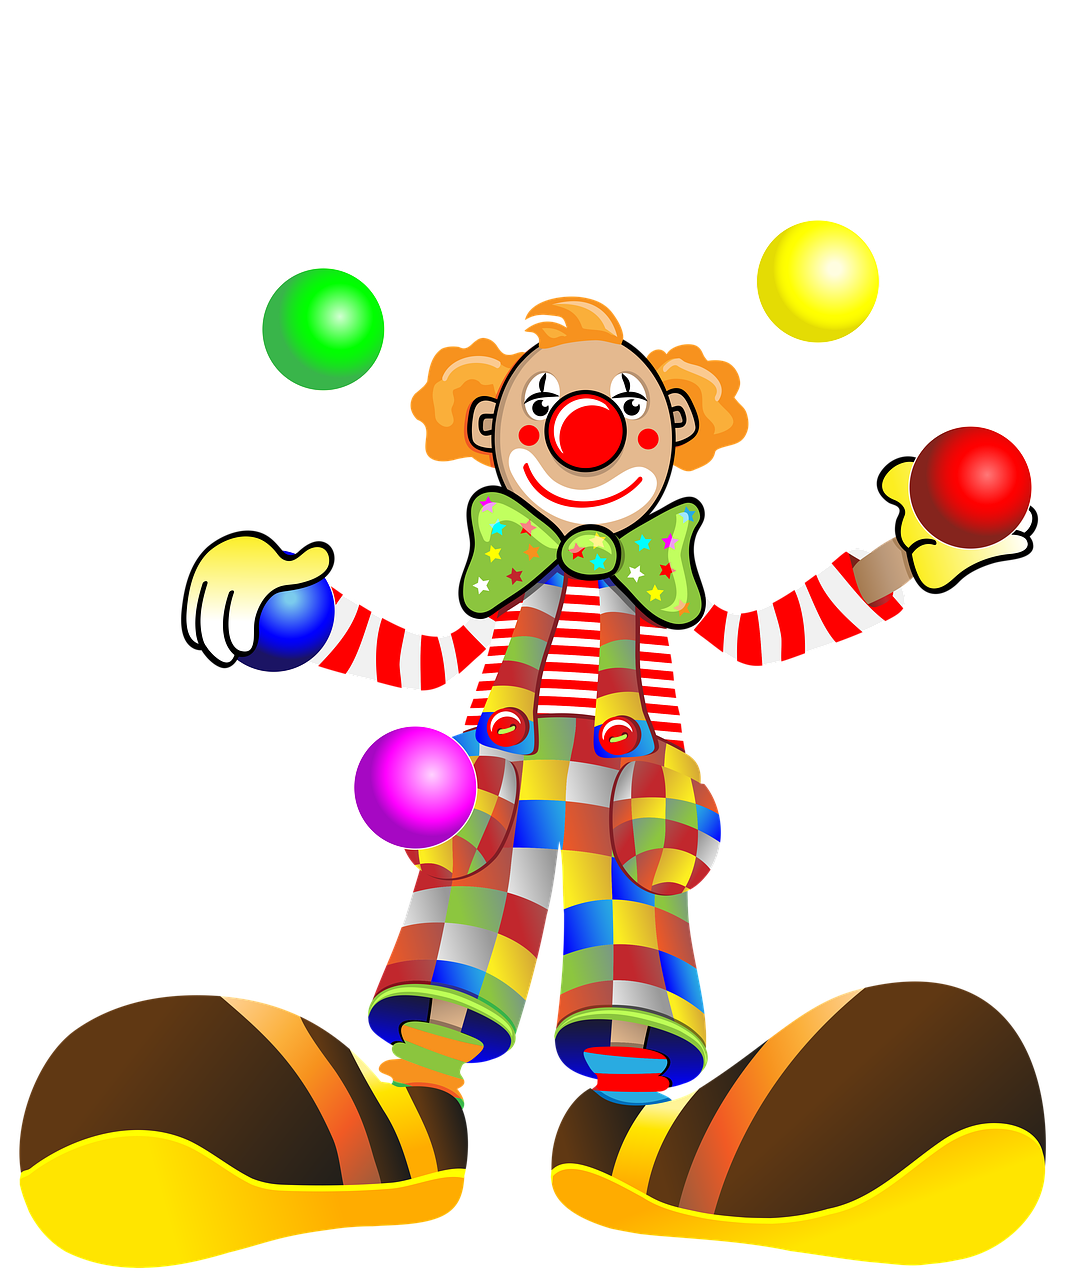 Juggling Ball PNG Pic Background